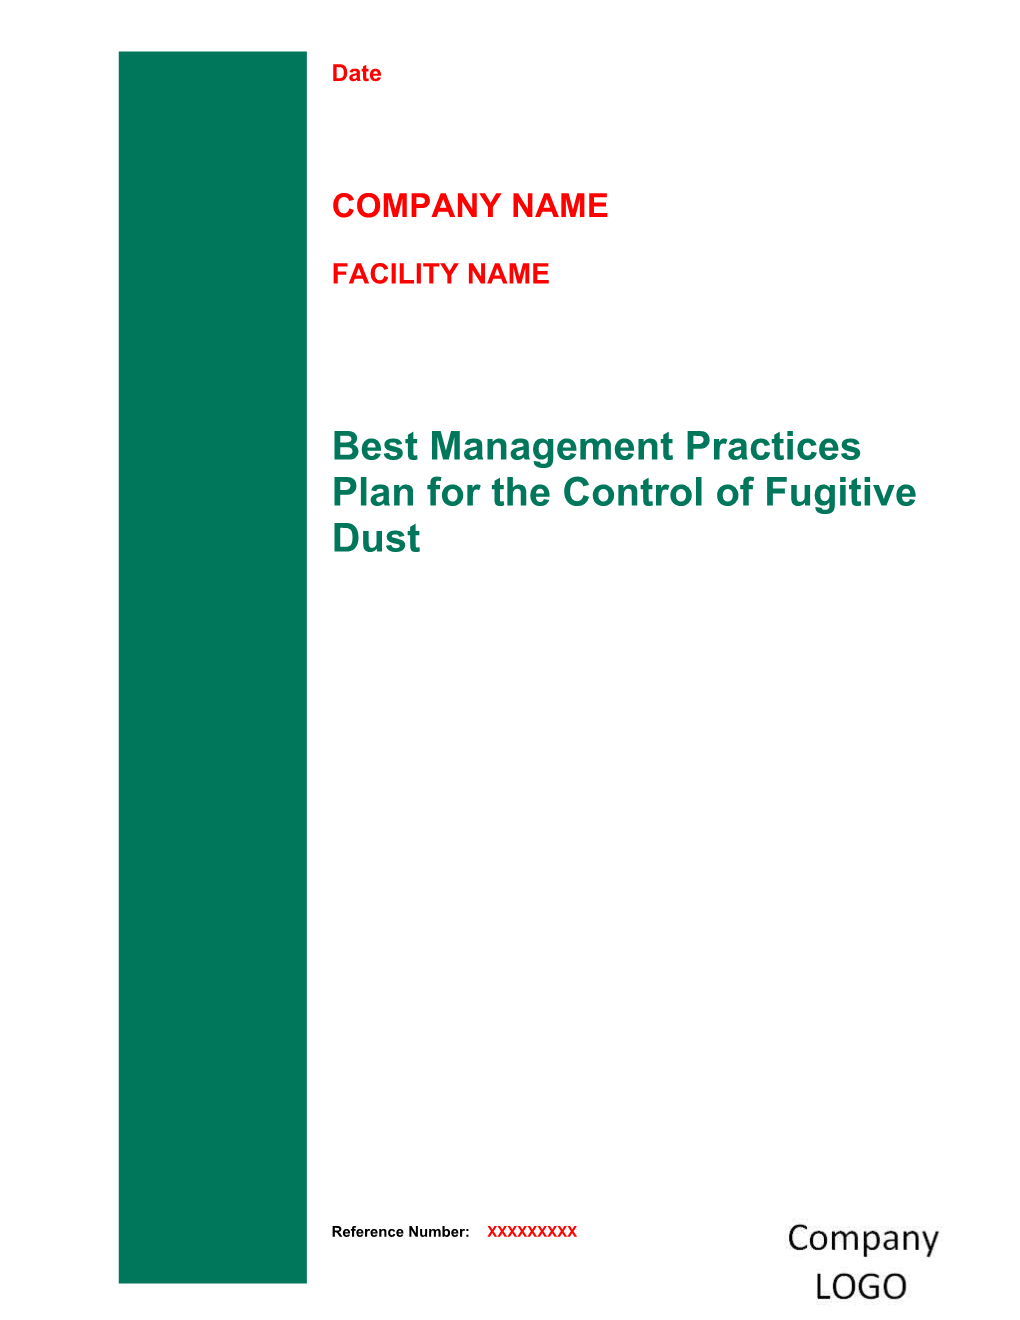 Best Management Practices Plan for the Control of Fugitive Dust